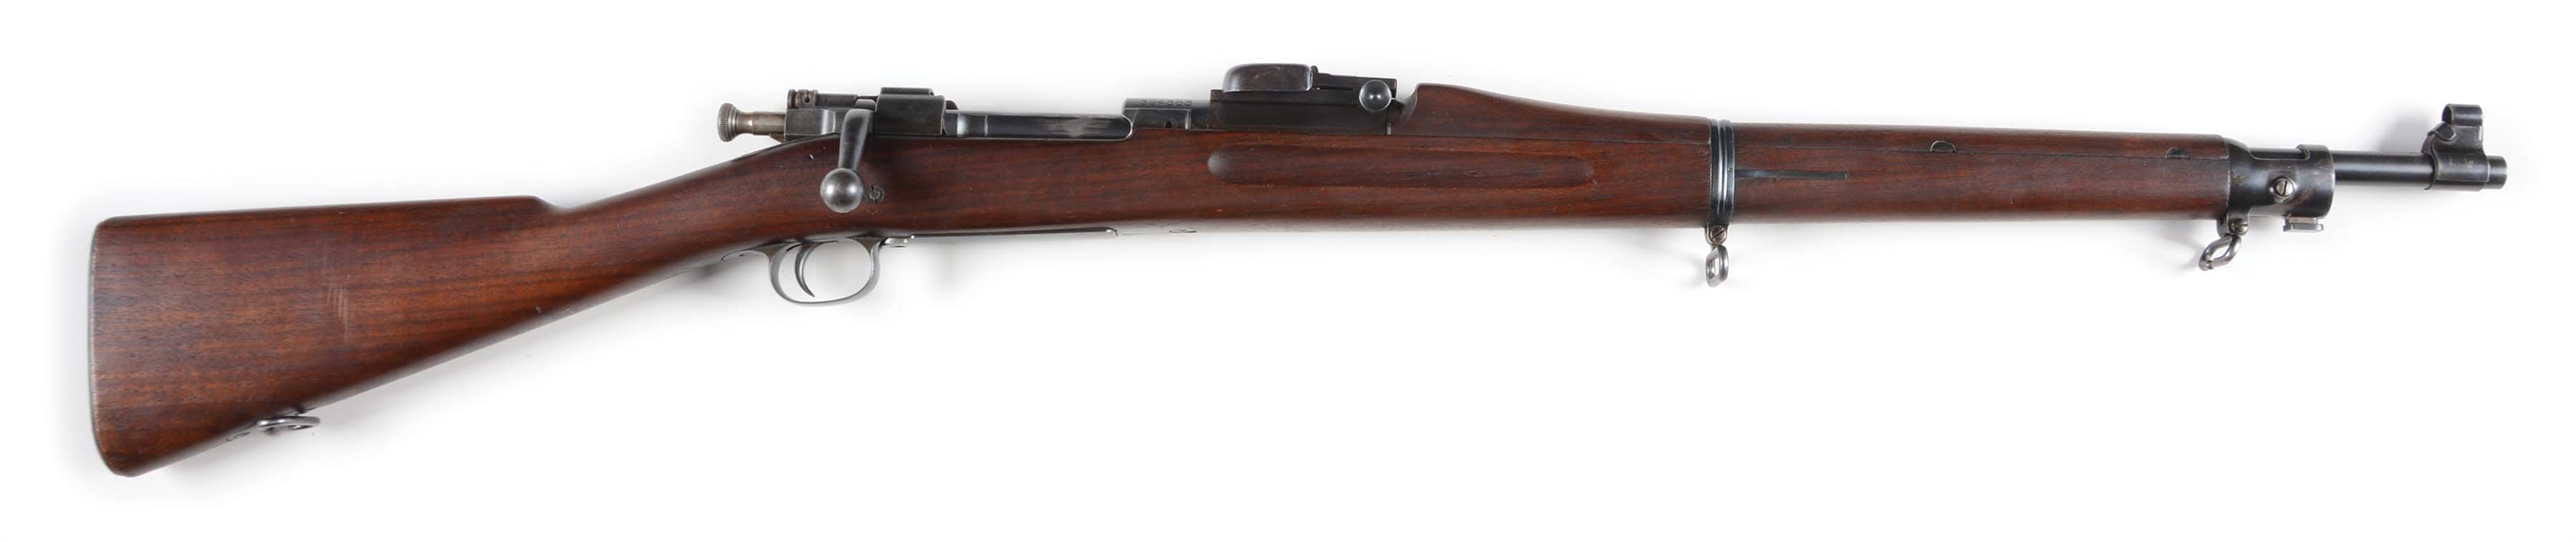 (C) SPRINGFIELD ARMORY M1903 BOLT ACTION RIFLE.